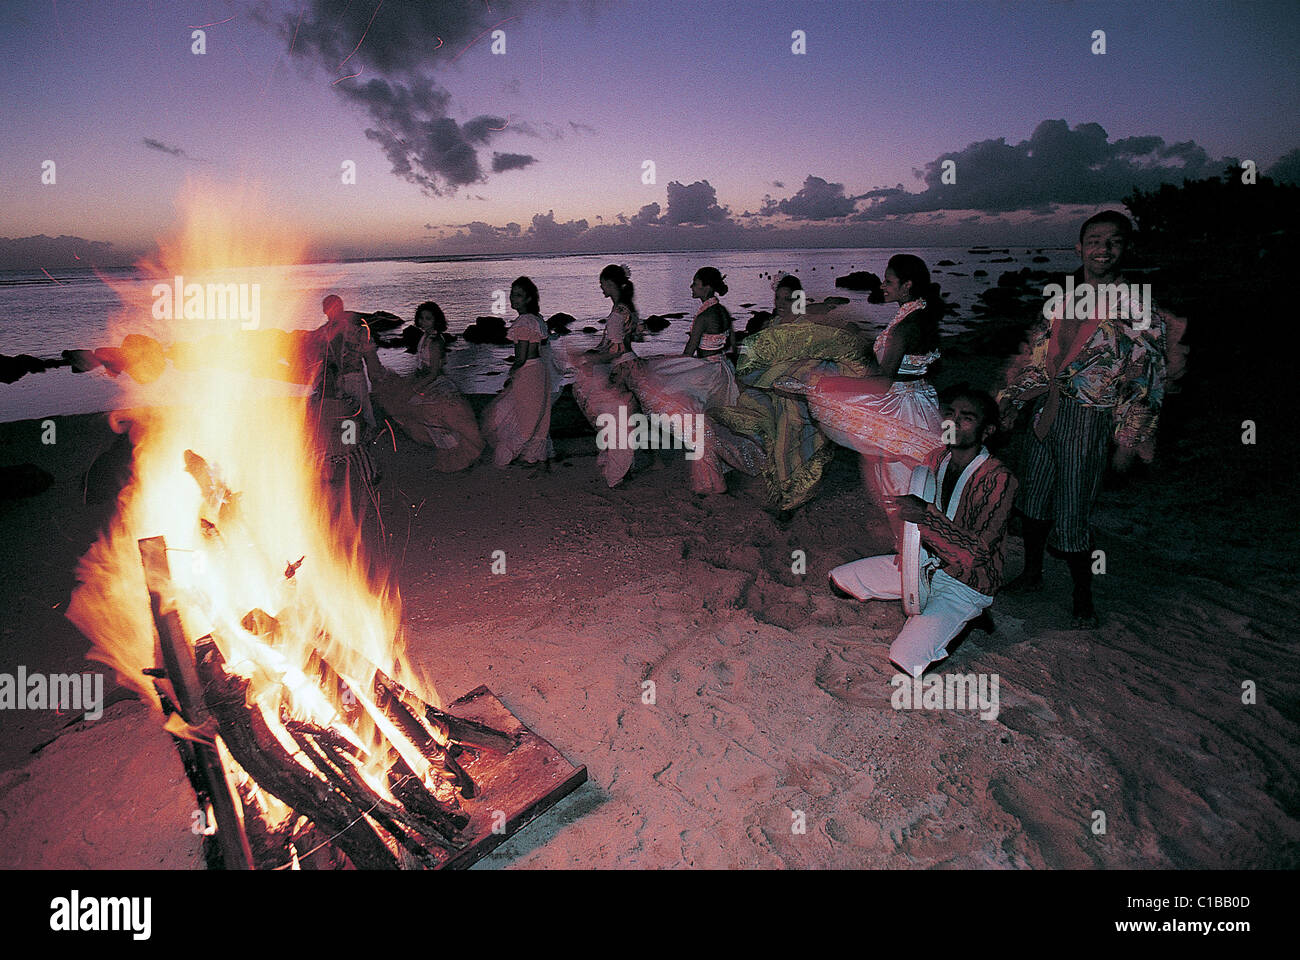 Mauritius), Women dancing the traditional Sega in the evening on a beach,artistic blur of the movement Stock Photo